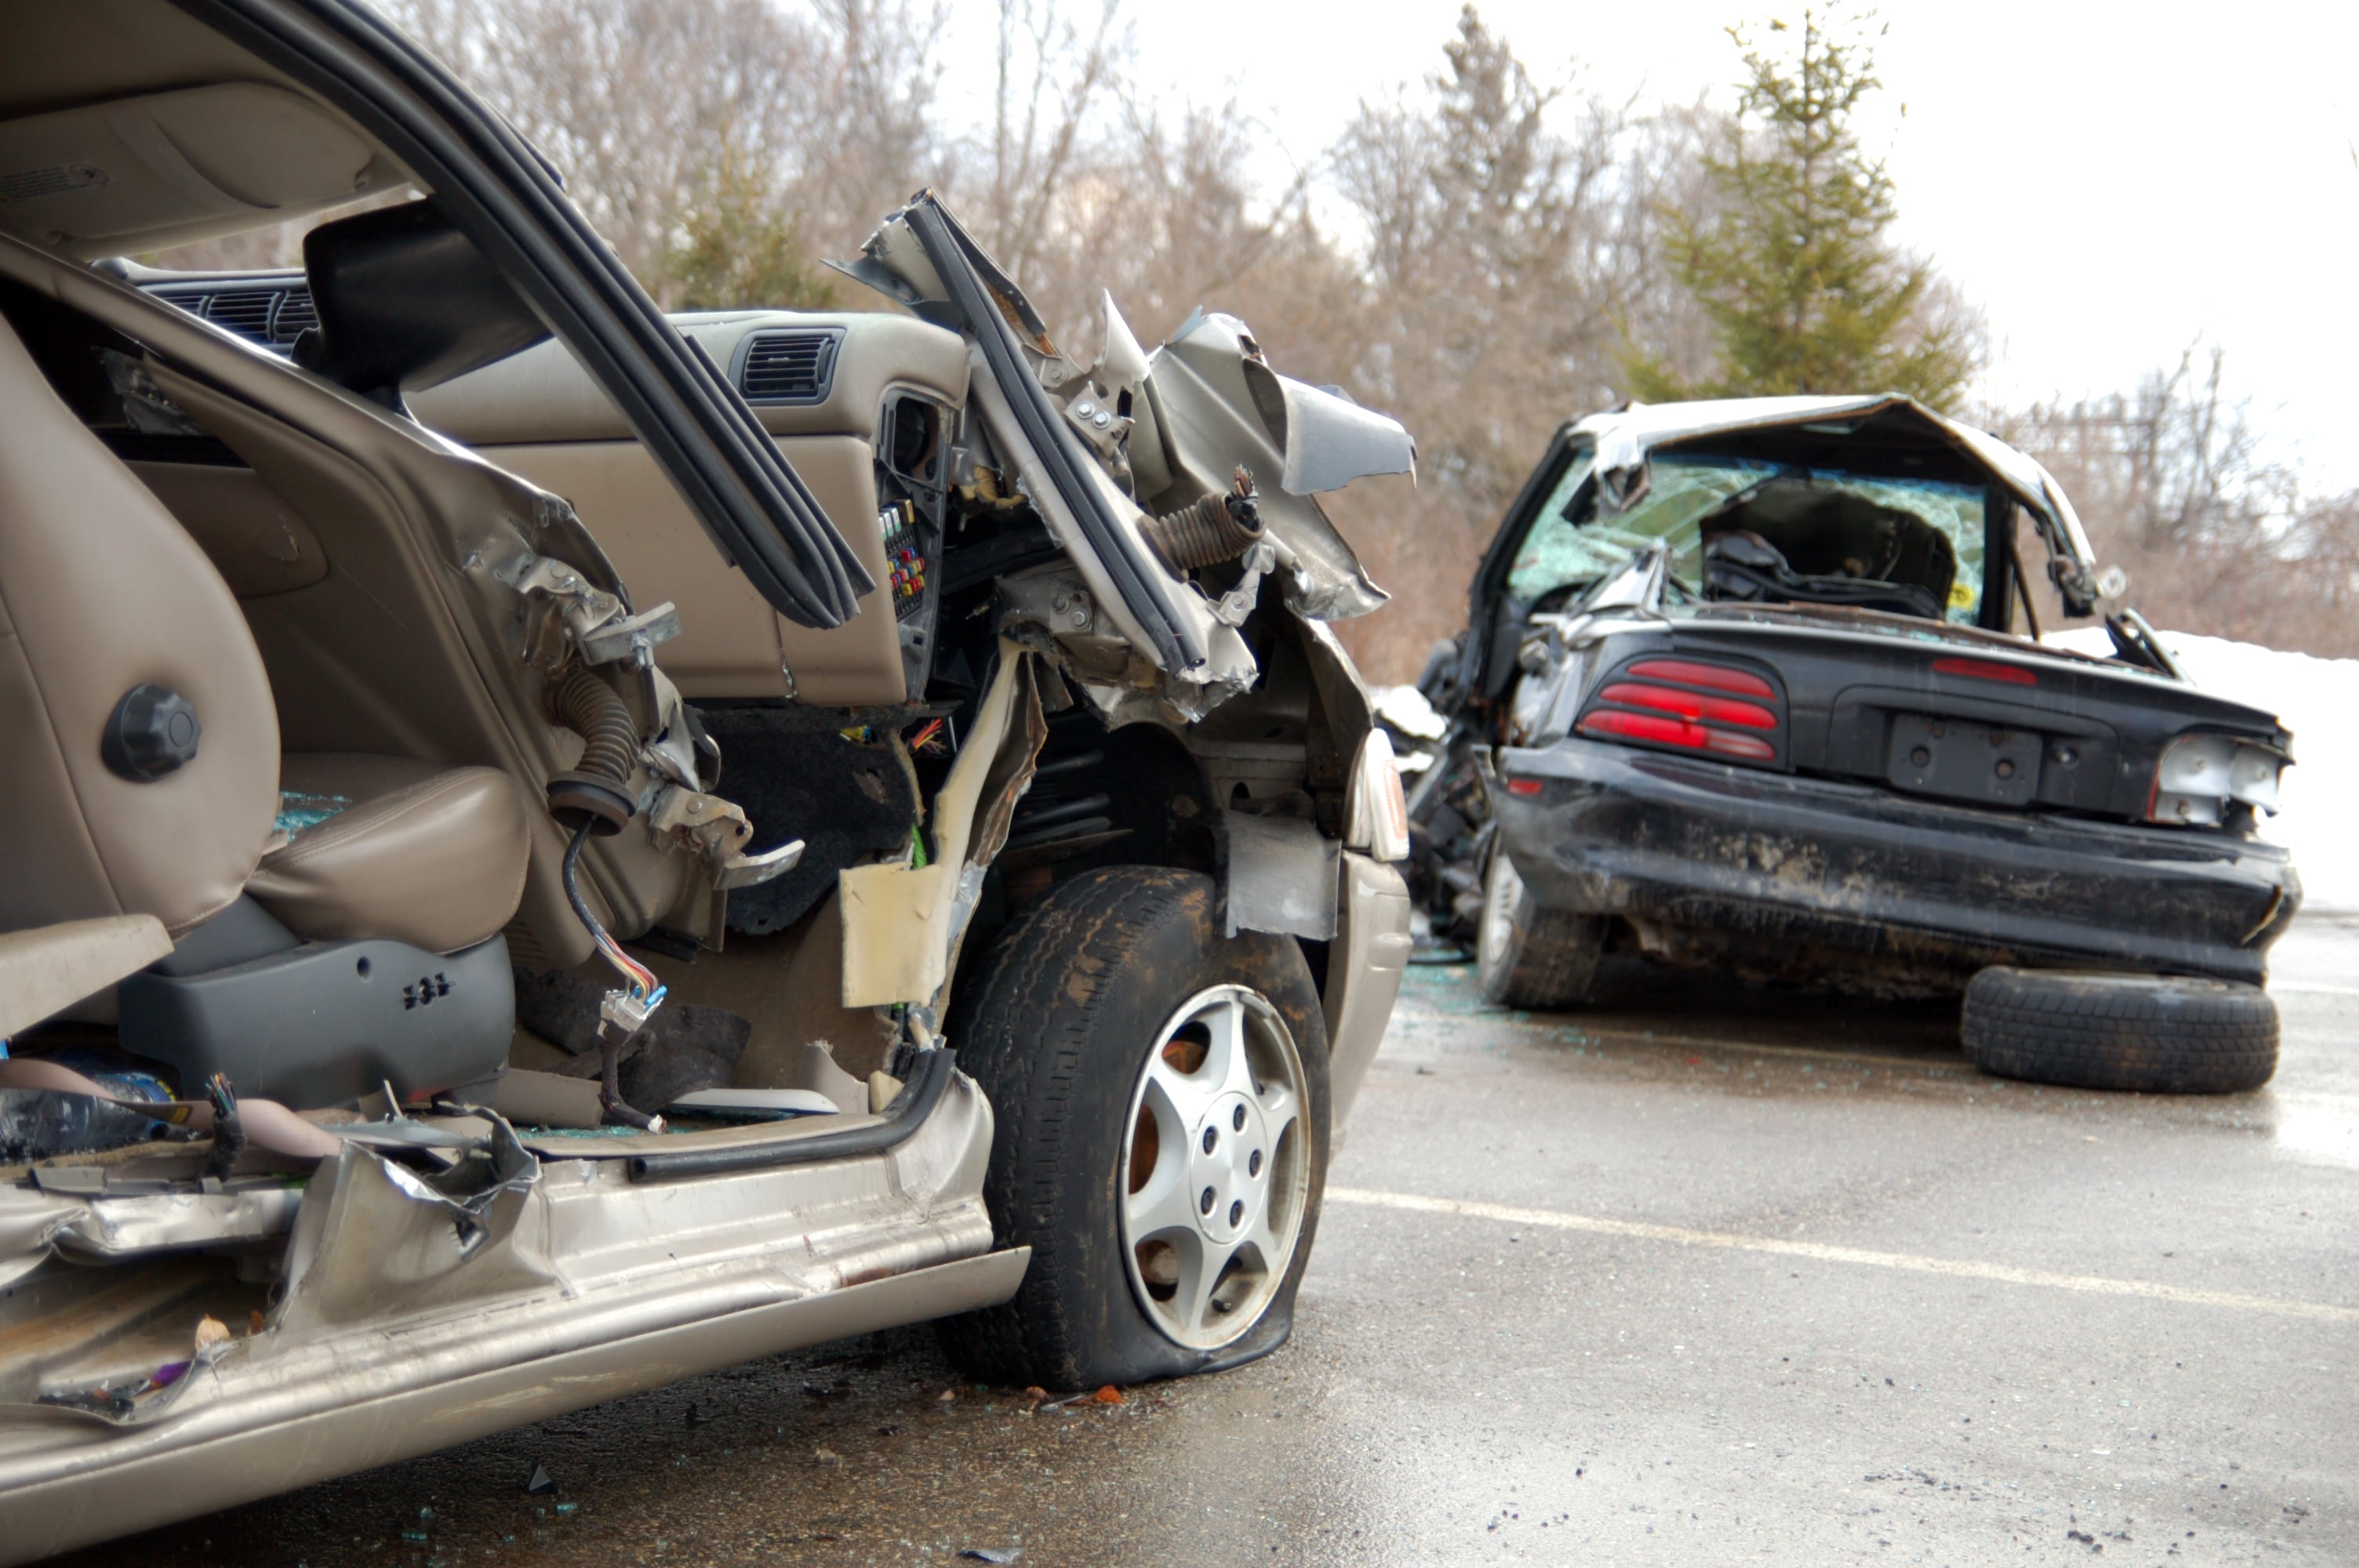 Get the Truth About Complications that Occur with Vehicle Repair After Car Accidents